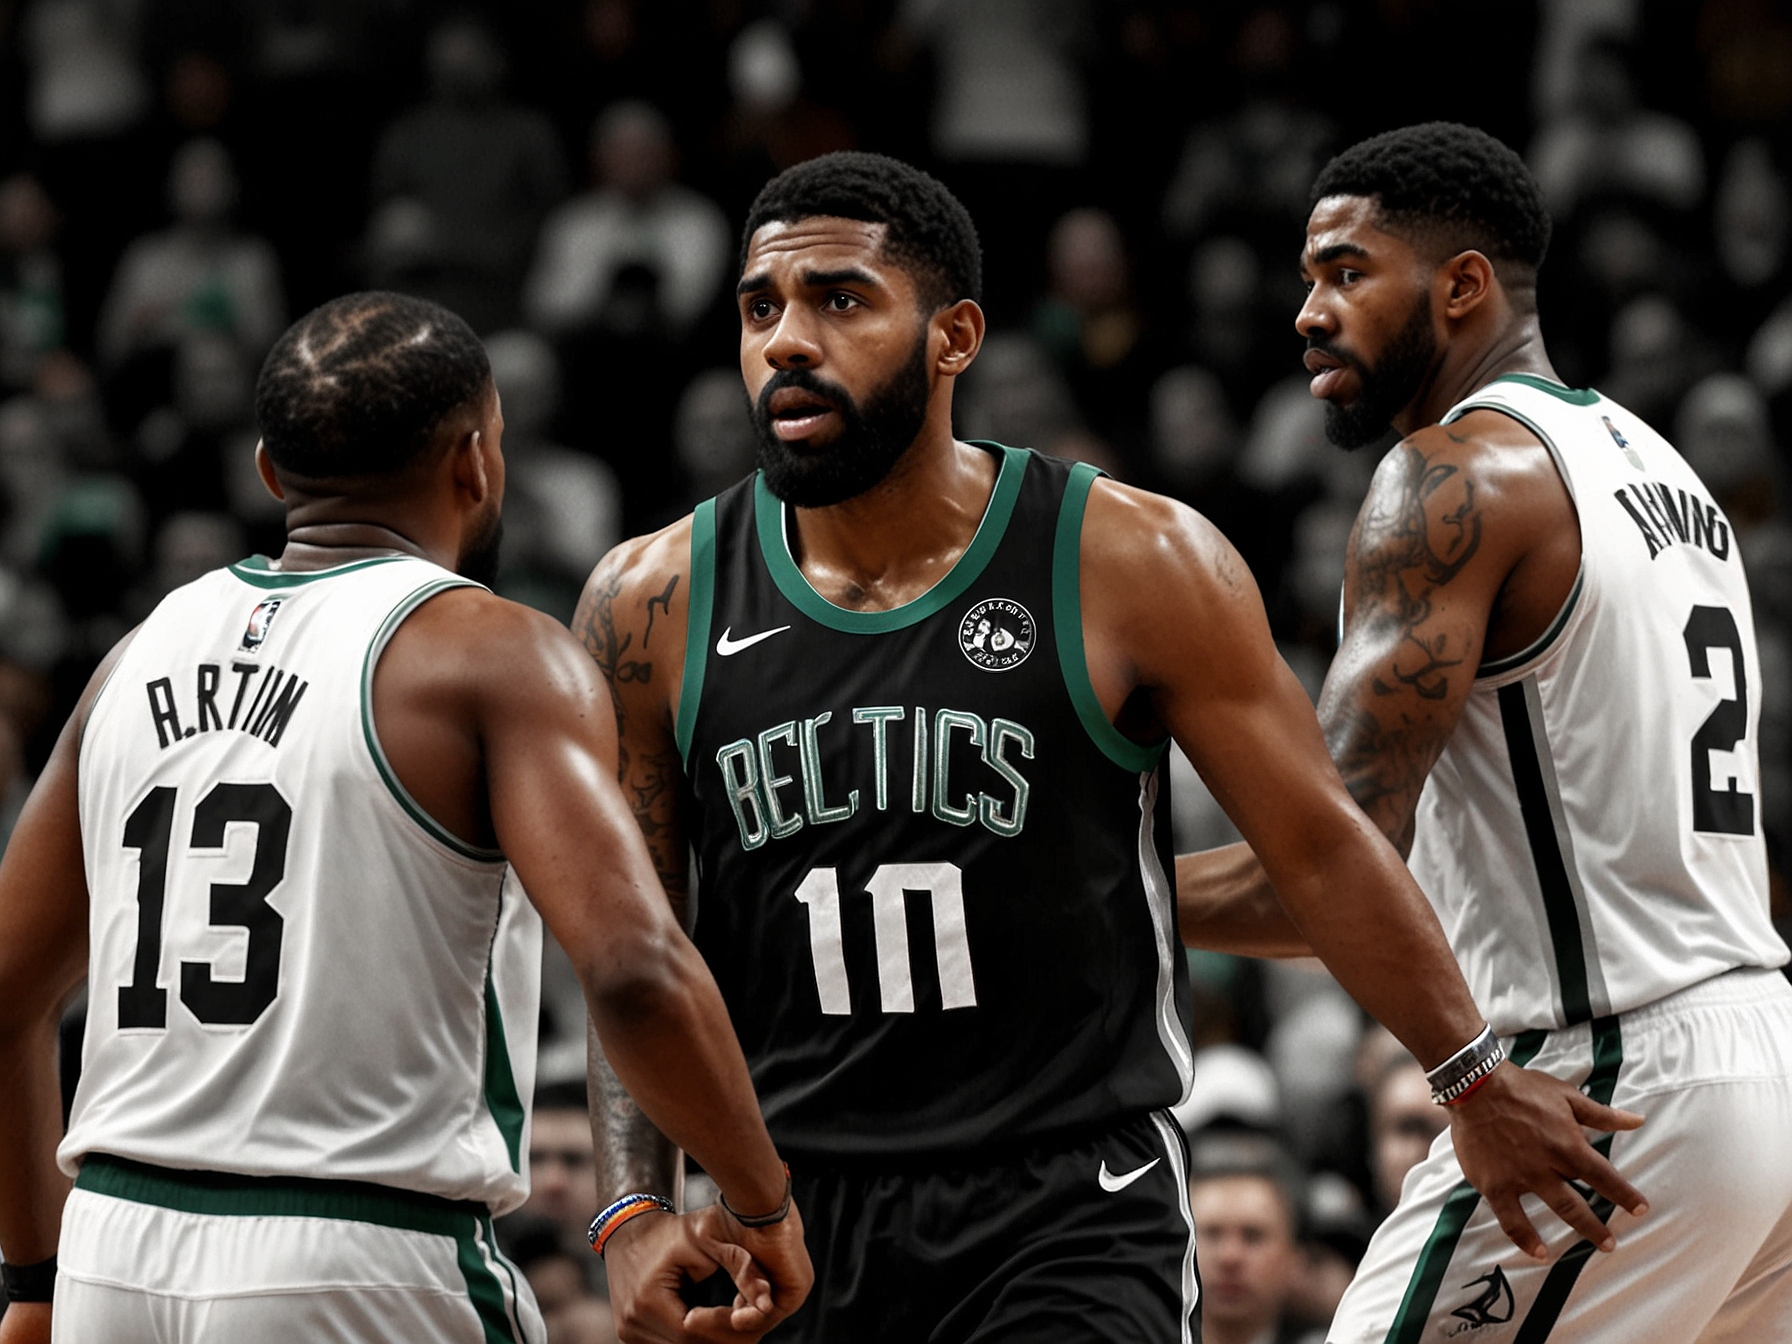 A tense moment from the Celtics vs Nets playoff series, where Kyrie Irving is guarded closely by Marcus Smart, with Boston fans in the background showing intense reactions.